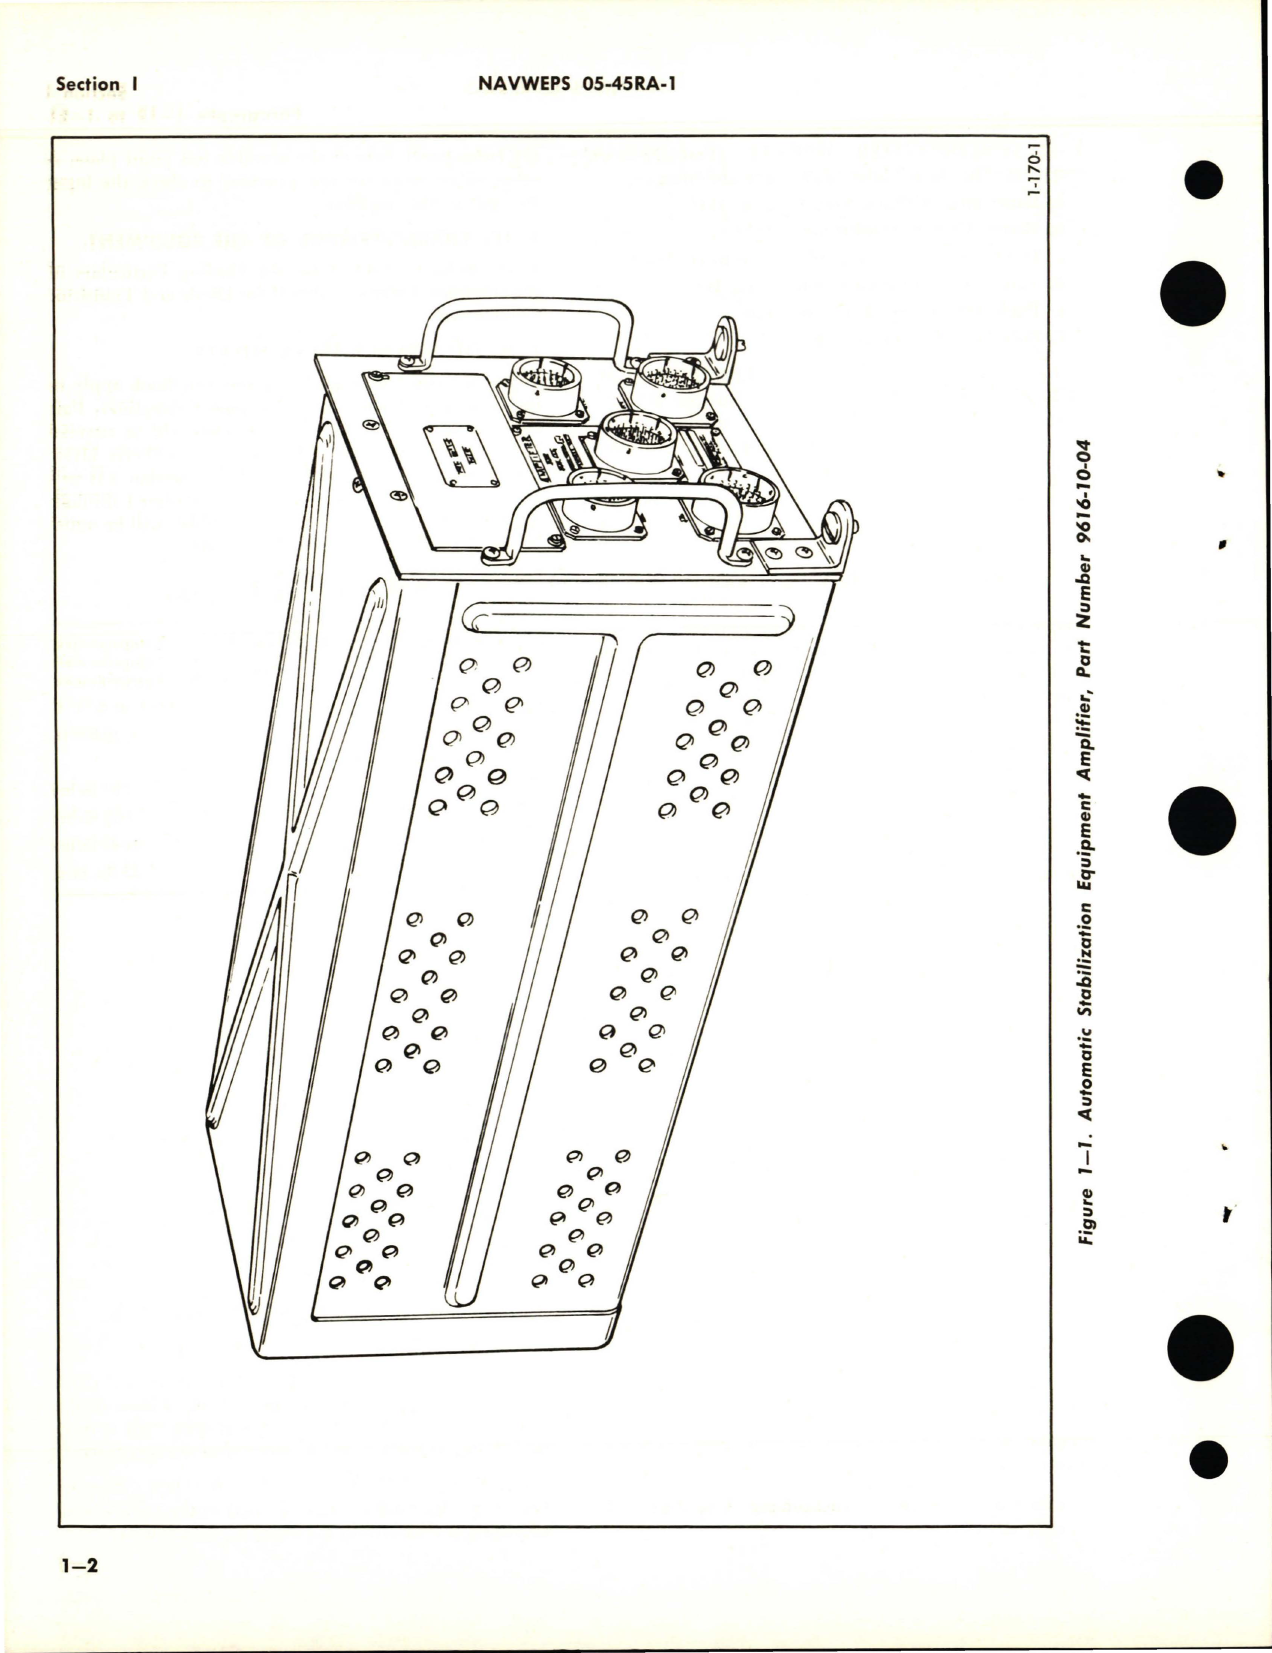 Sample page 8 from AirCorps Library document: Overhaul Instructions for Automatic Stabilization Equipment Amplifier - Part 9616-10-04